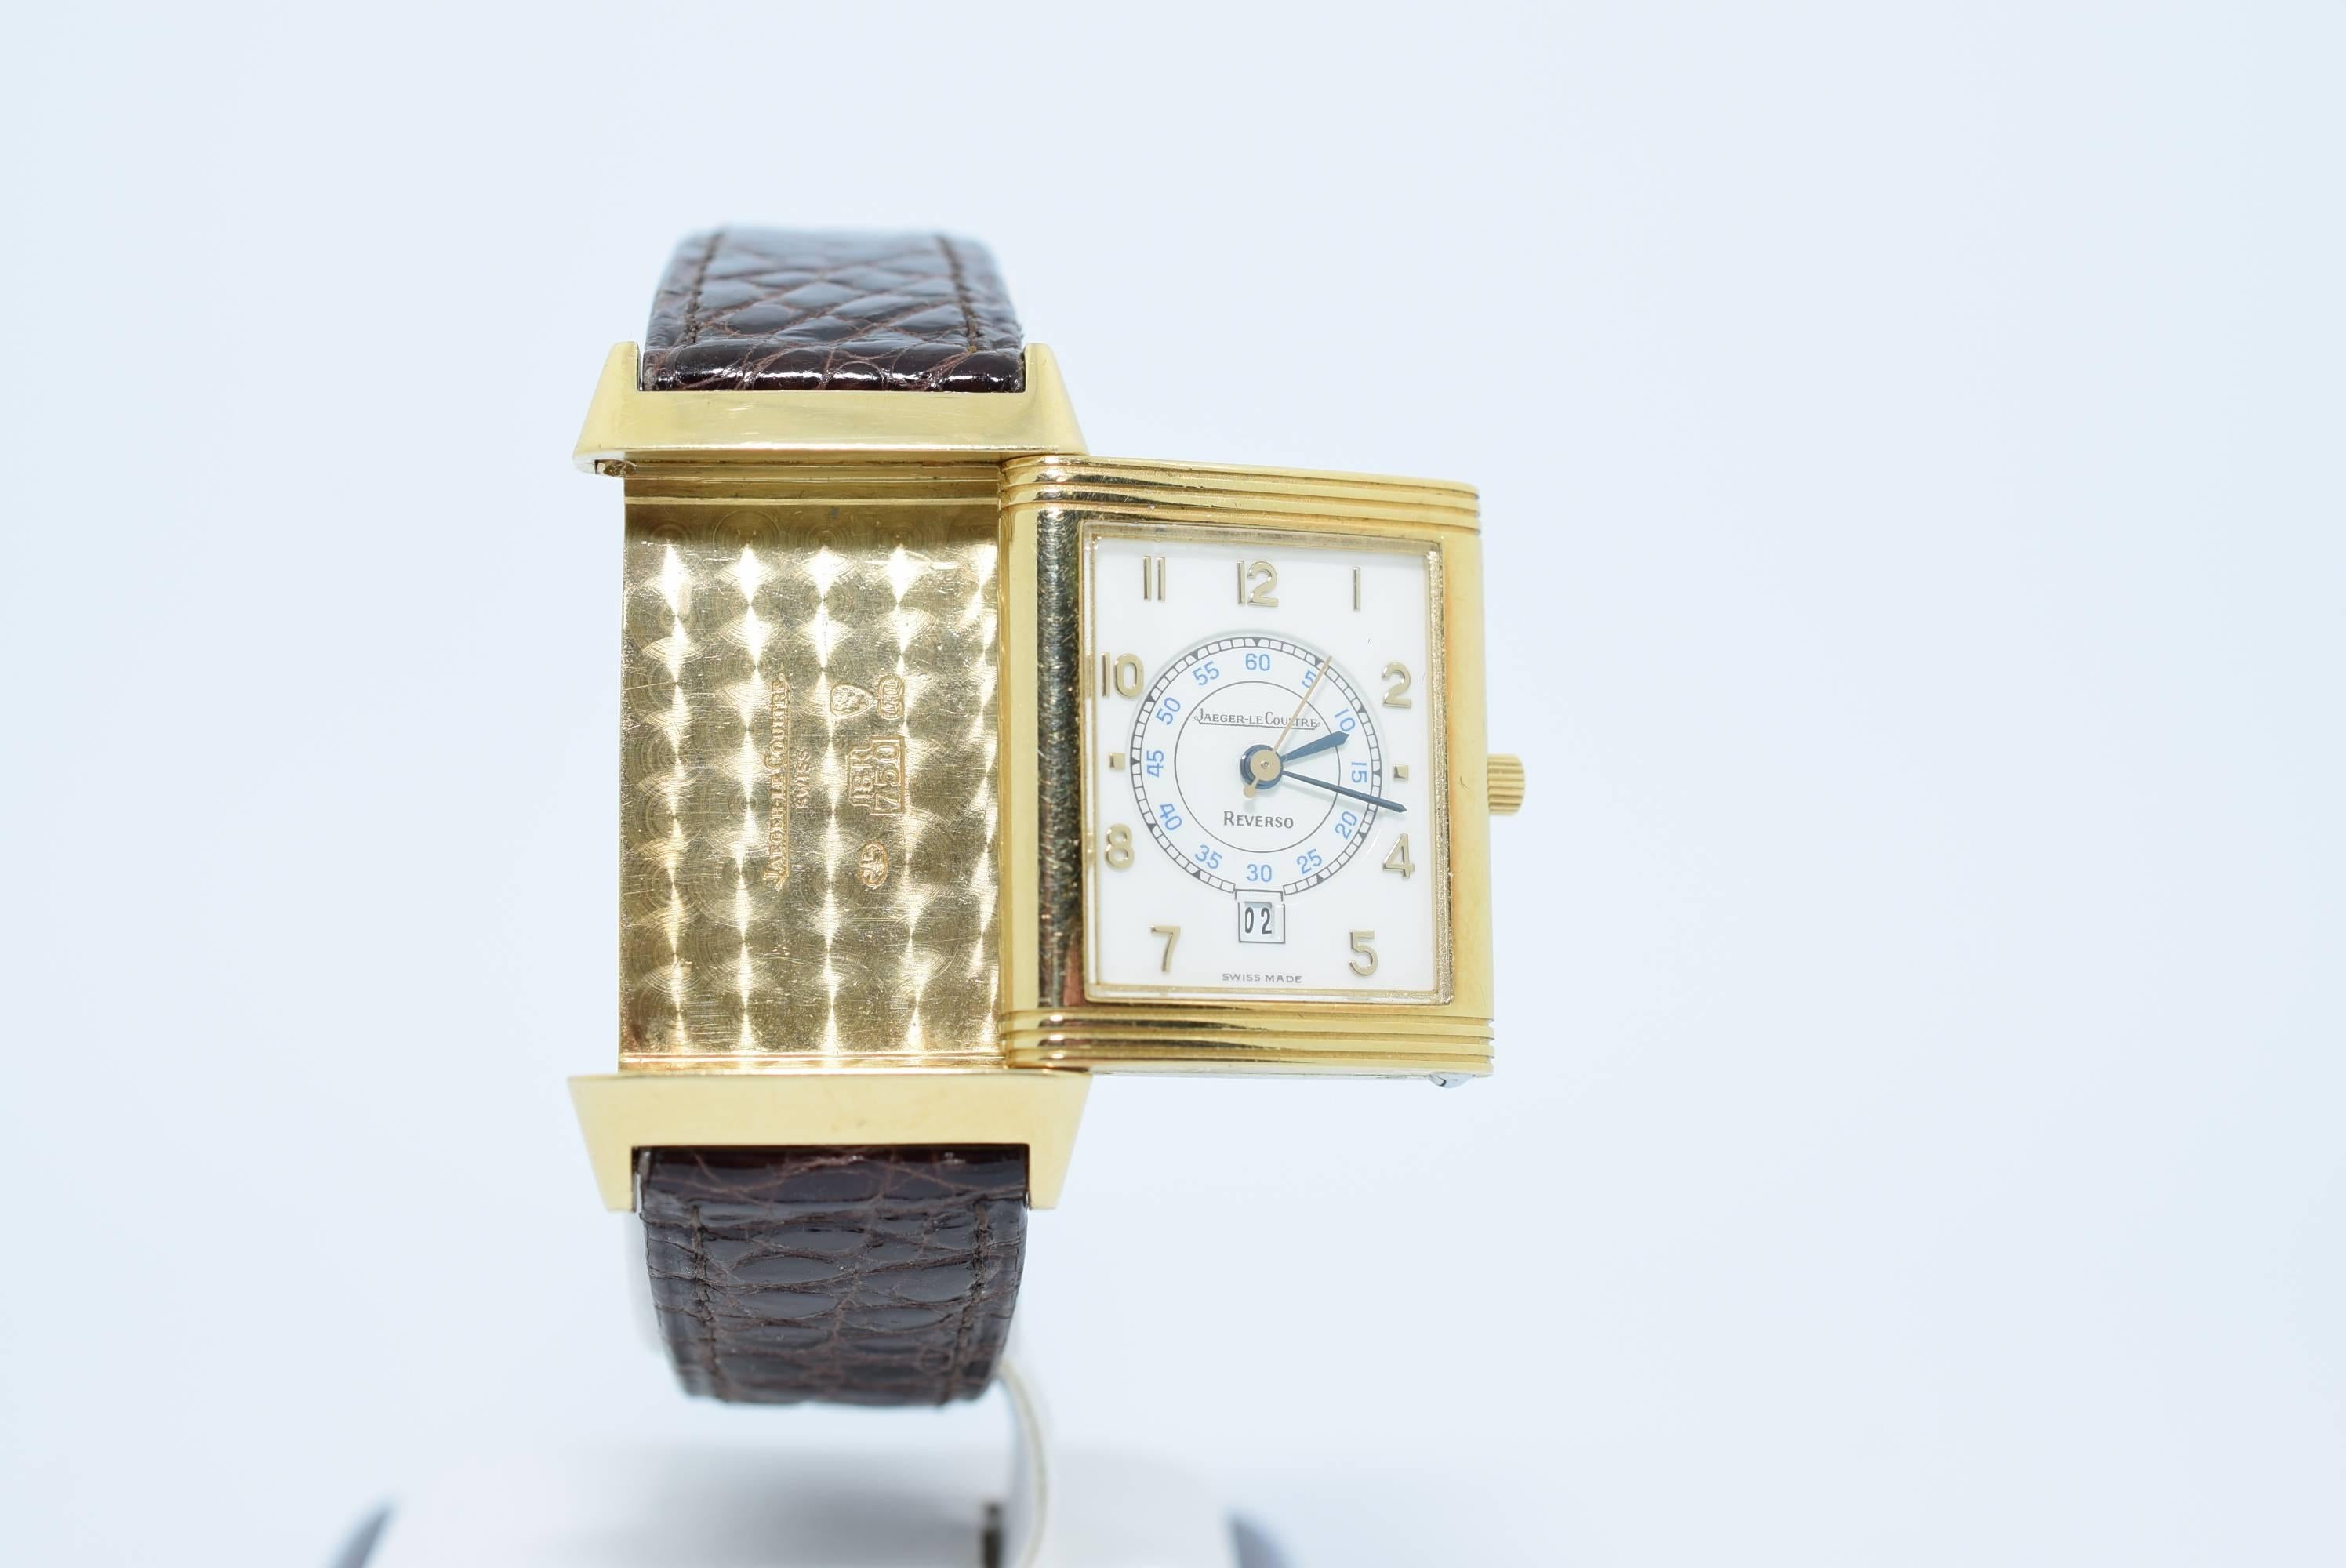 Jaeger Le Coultre ladies Reverso watch in 18k yellow gold, quartz with calendar.
Model number - 250.1.11
Circa 2005
White Enamel Dial with arabic numerals.
Dimensions: 1.75x1.0 inches
Brown Crocodile Band
Serial number _ 1671614
Warranty for